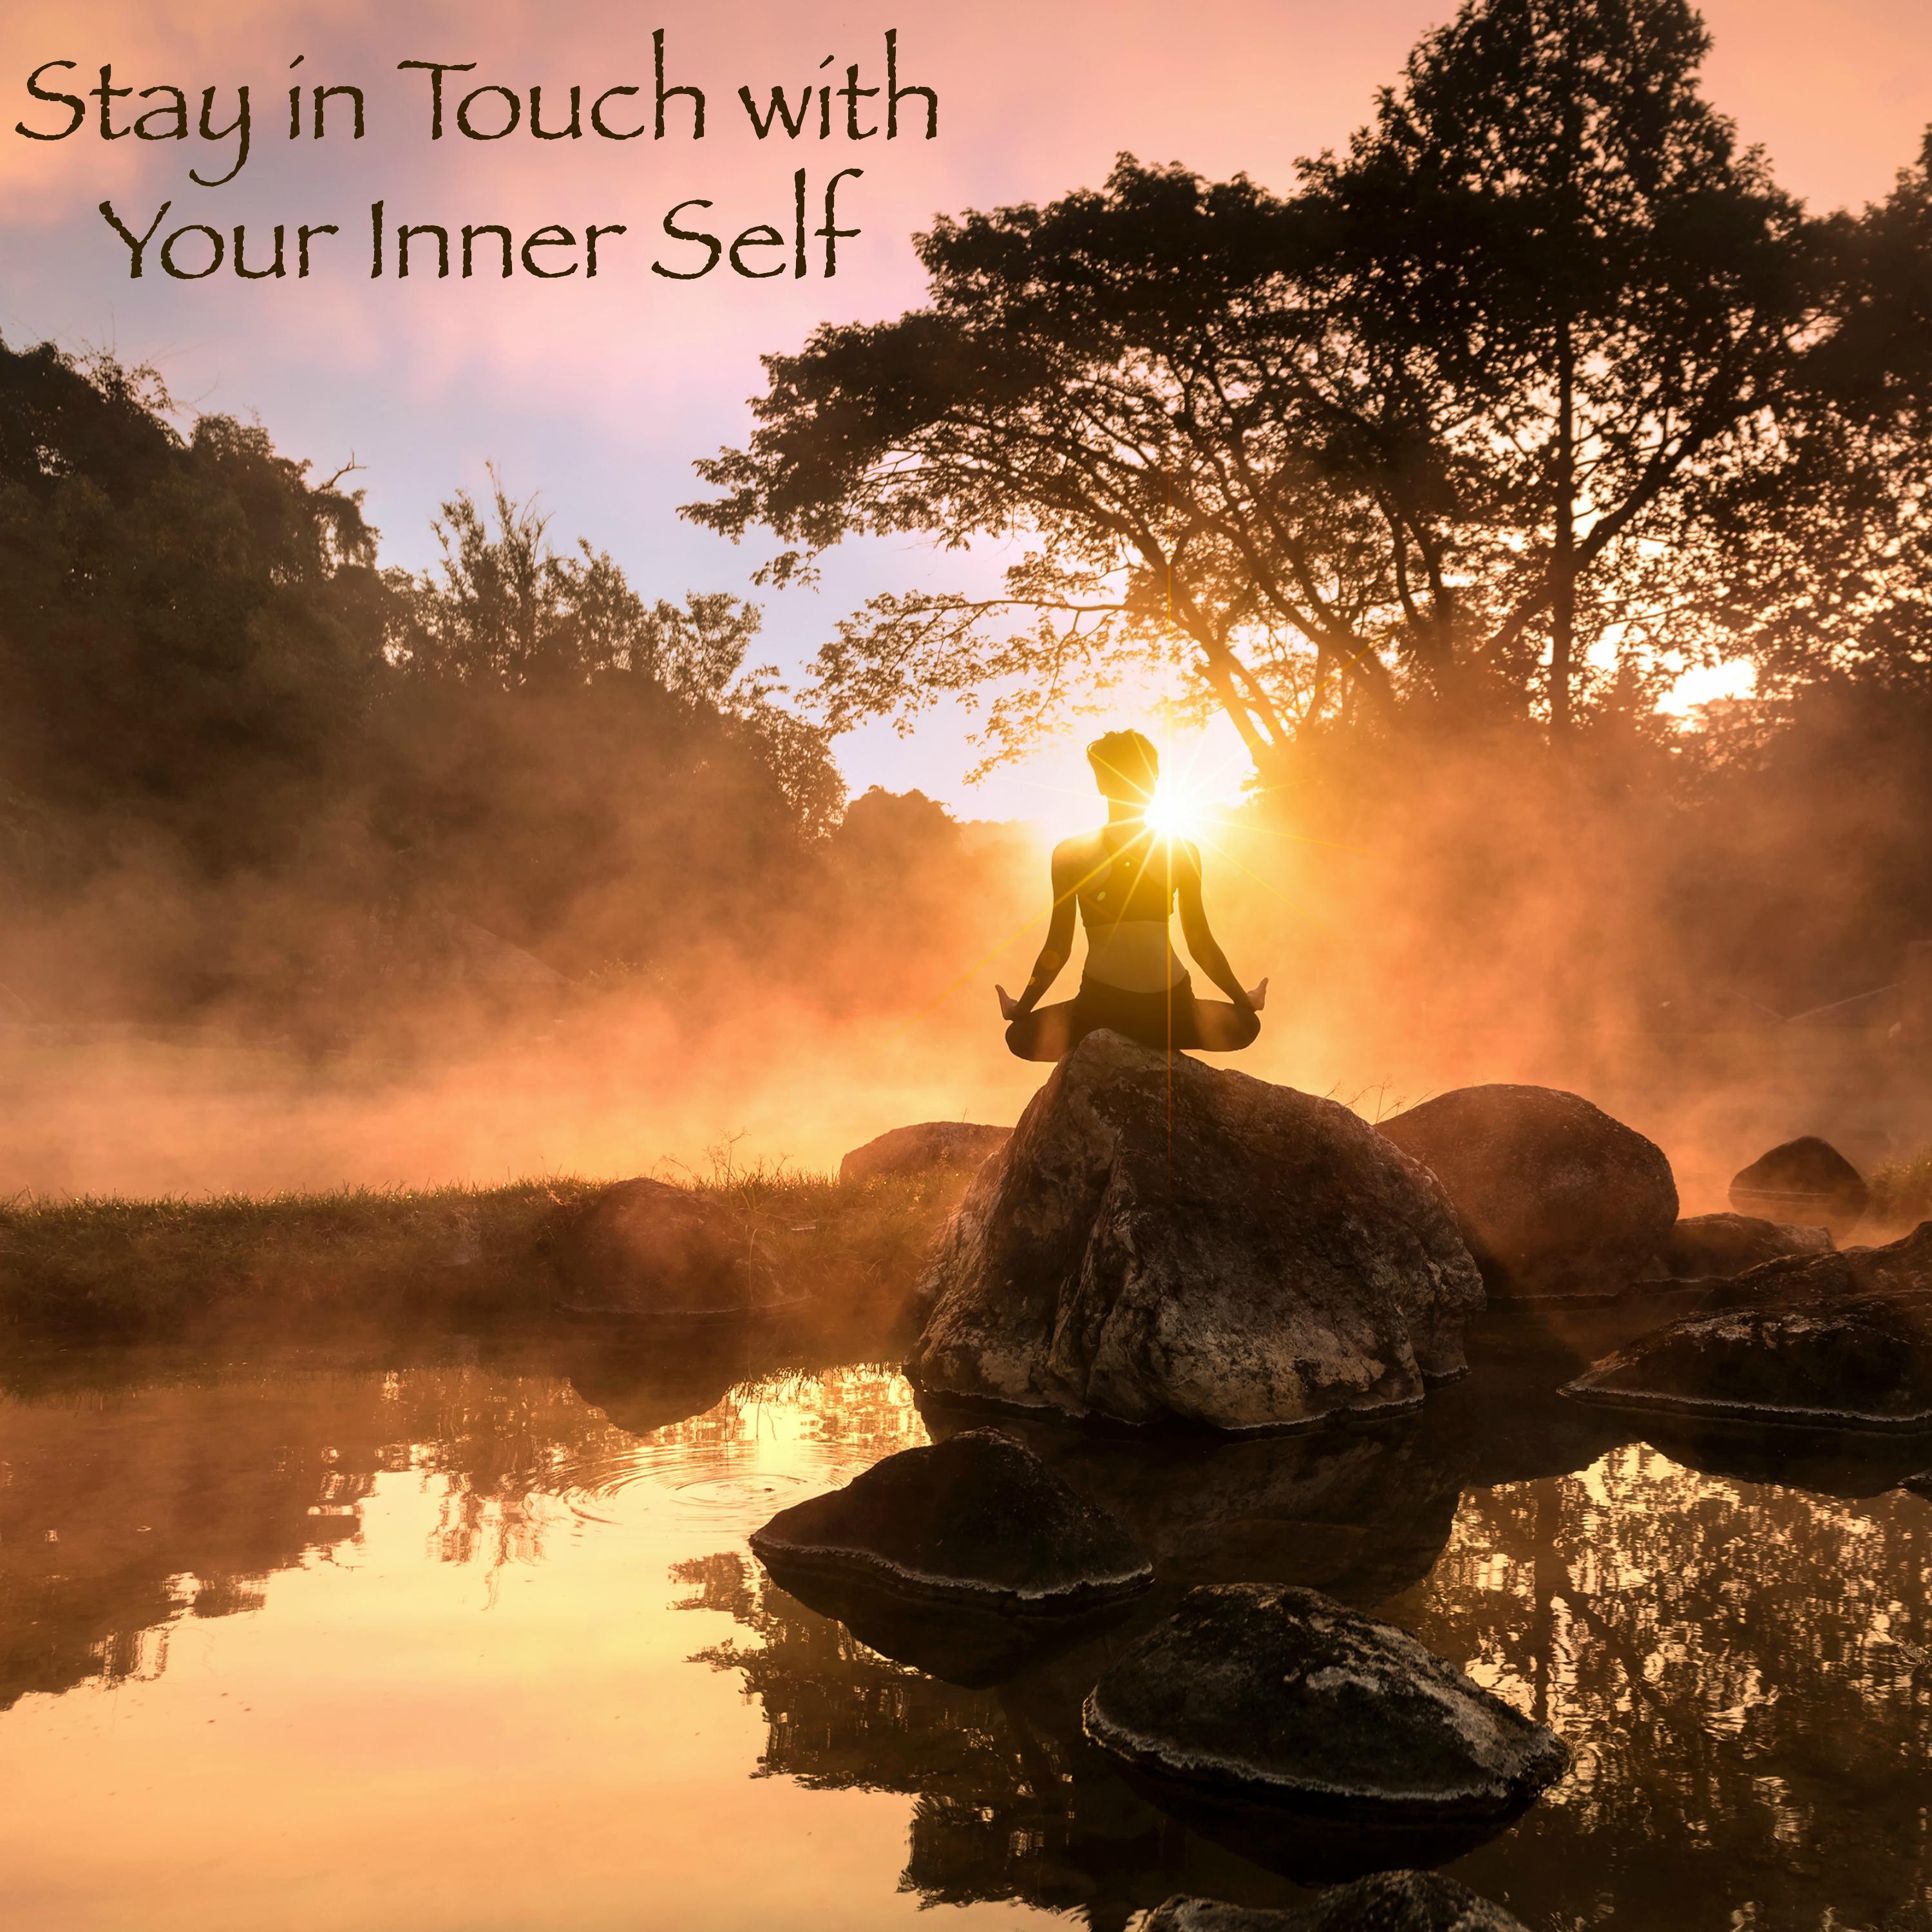 Stay in Touch with Your Inner Self